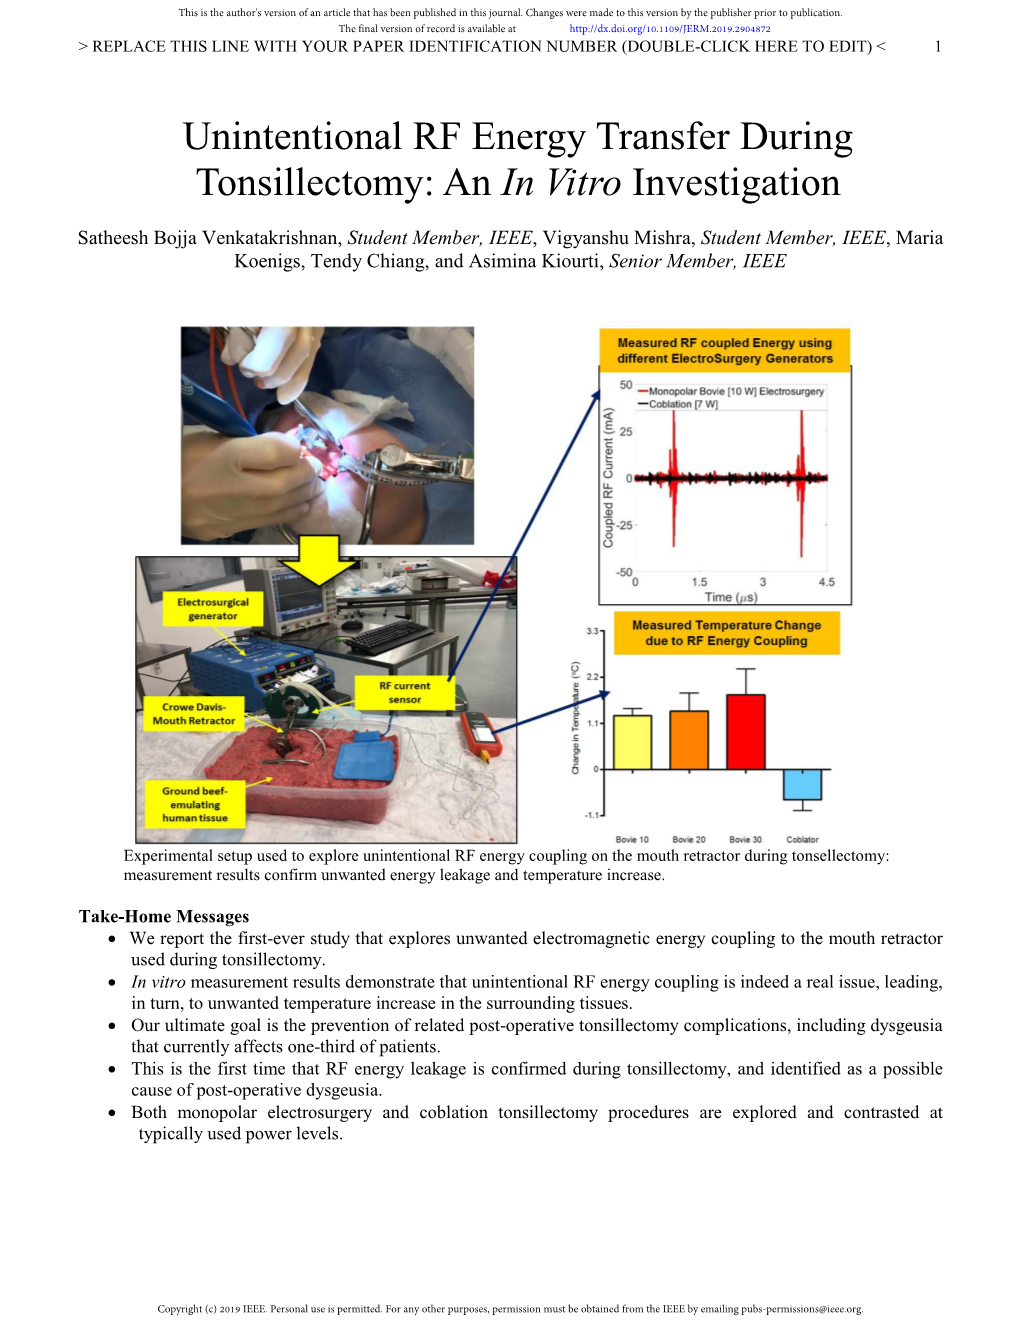 Unintentional RF Energy Transfer During Tonsillectomy: an in Vitro Investigation